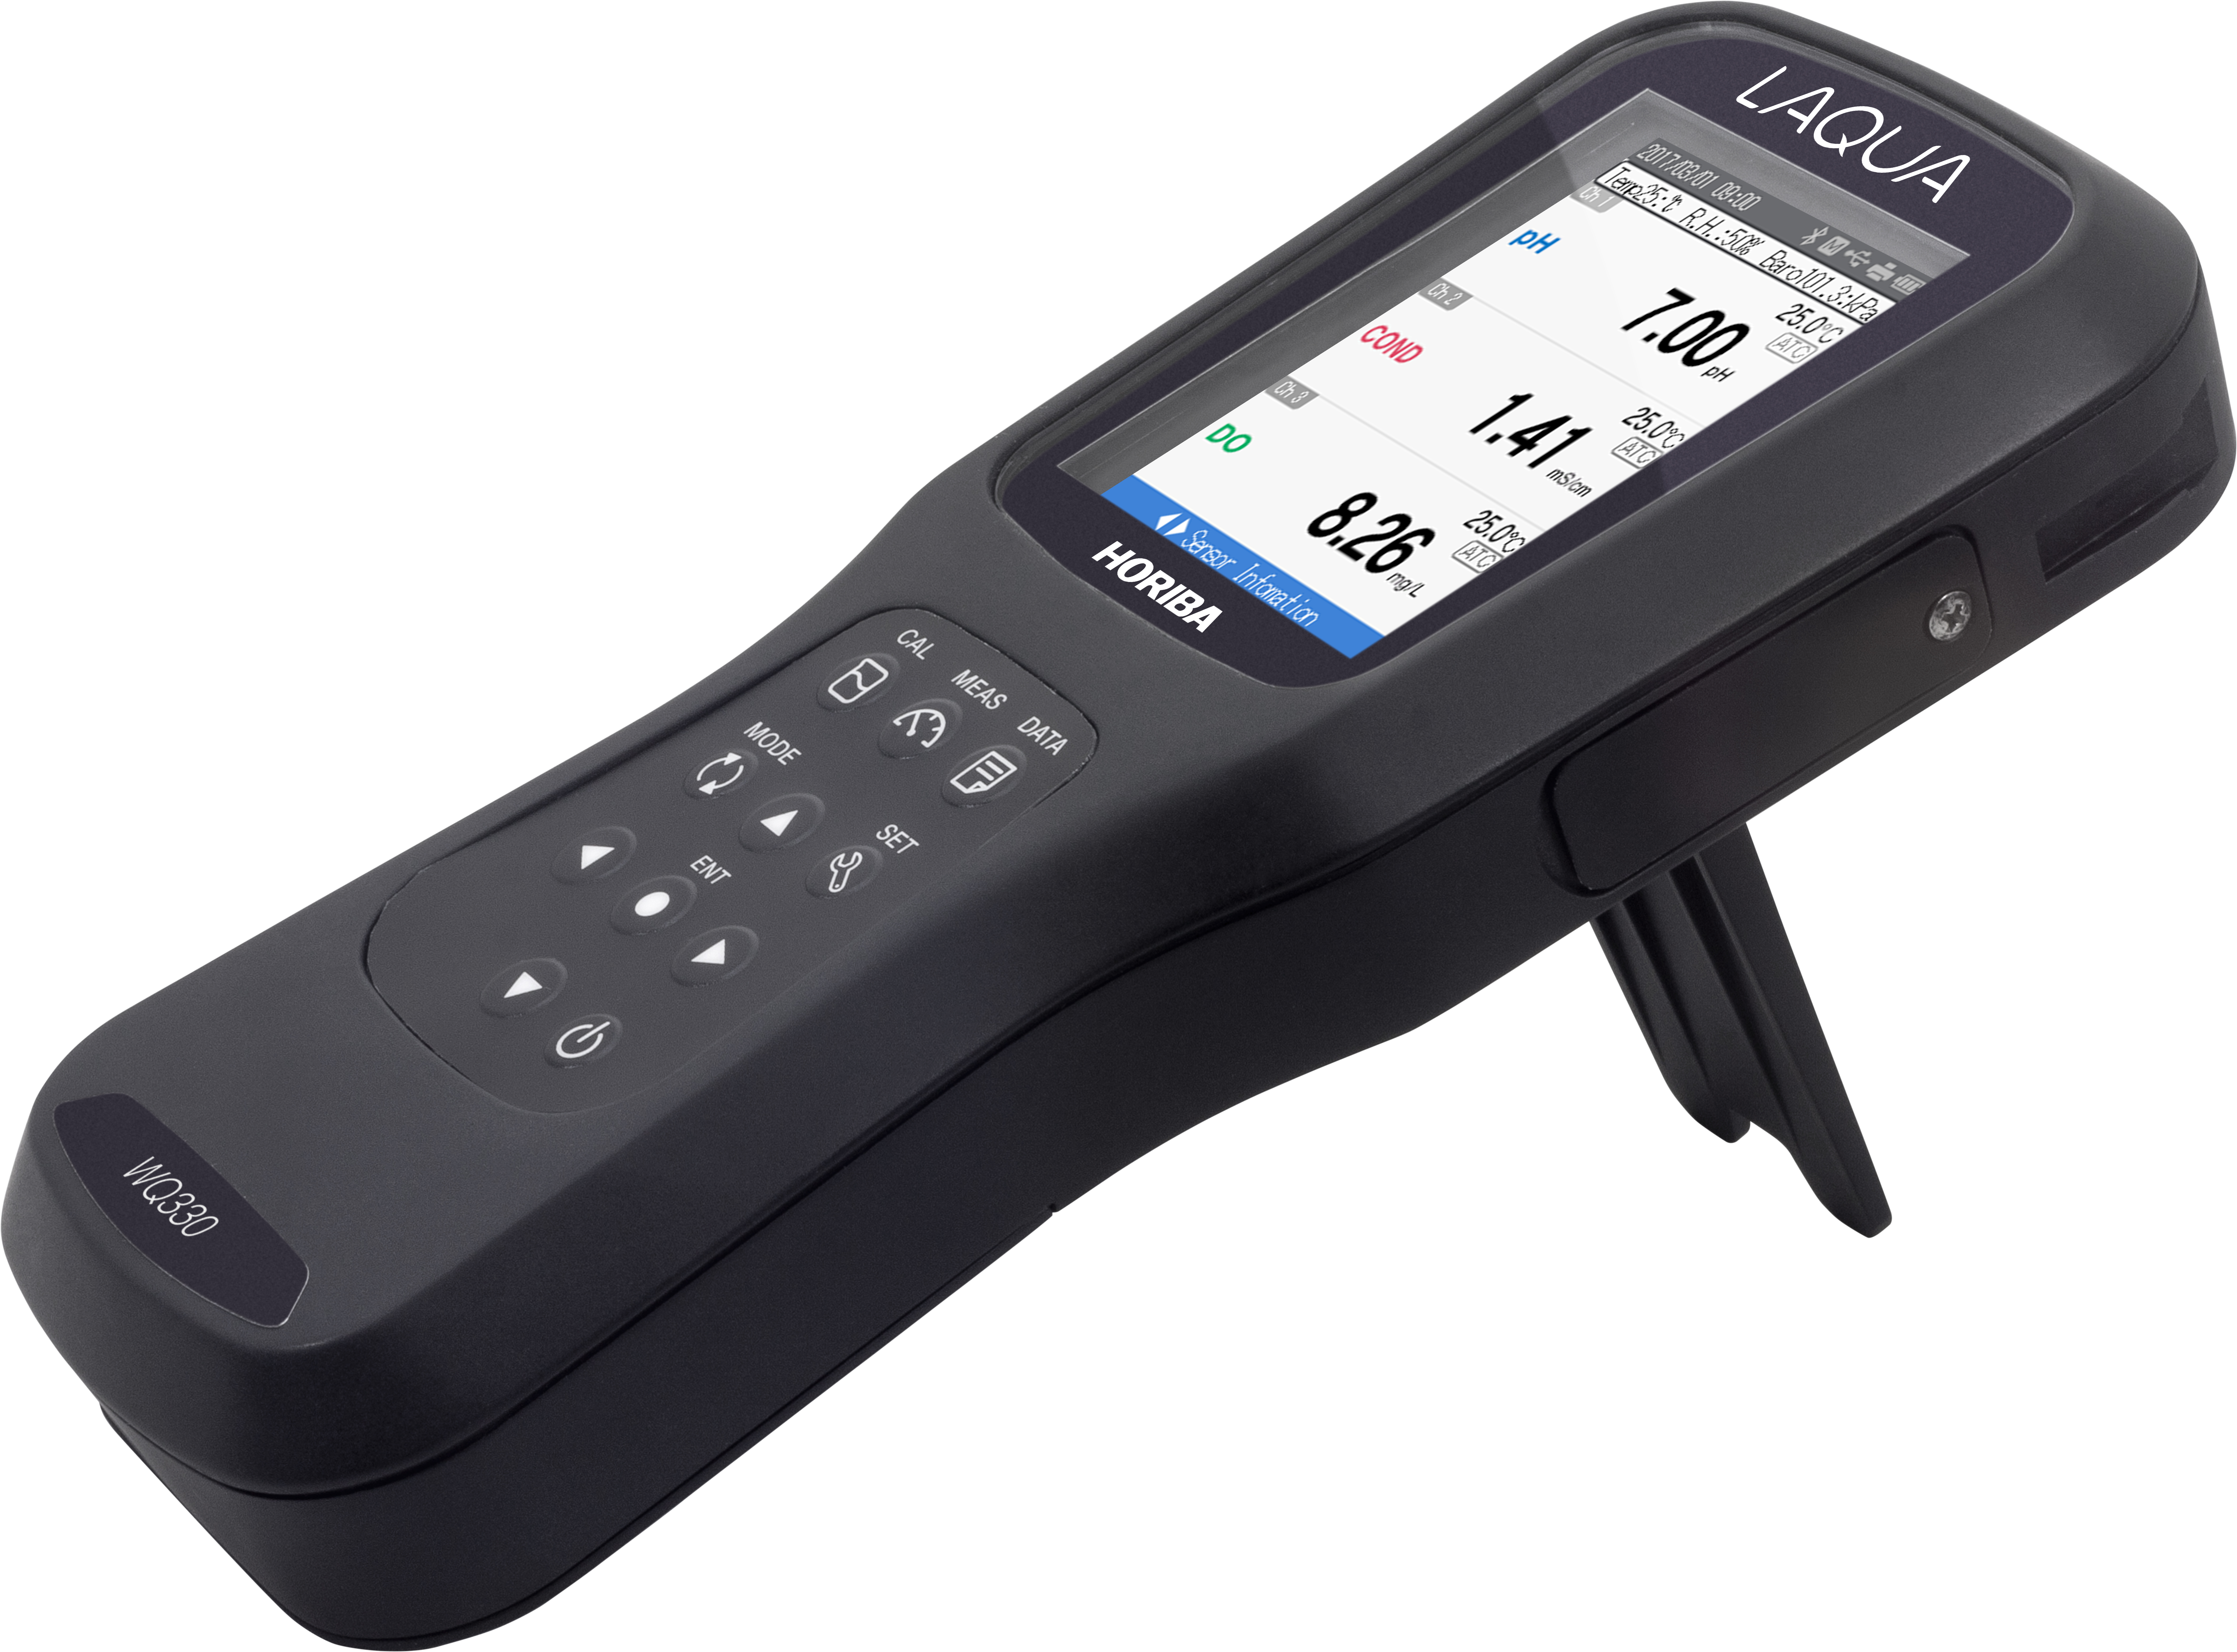 Horiba LAQUA WQ330-K - 3 channel professional measuring device for various parameters in analysis case